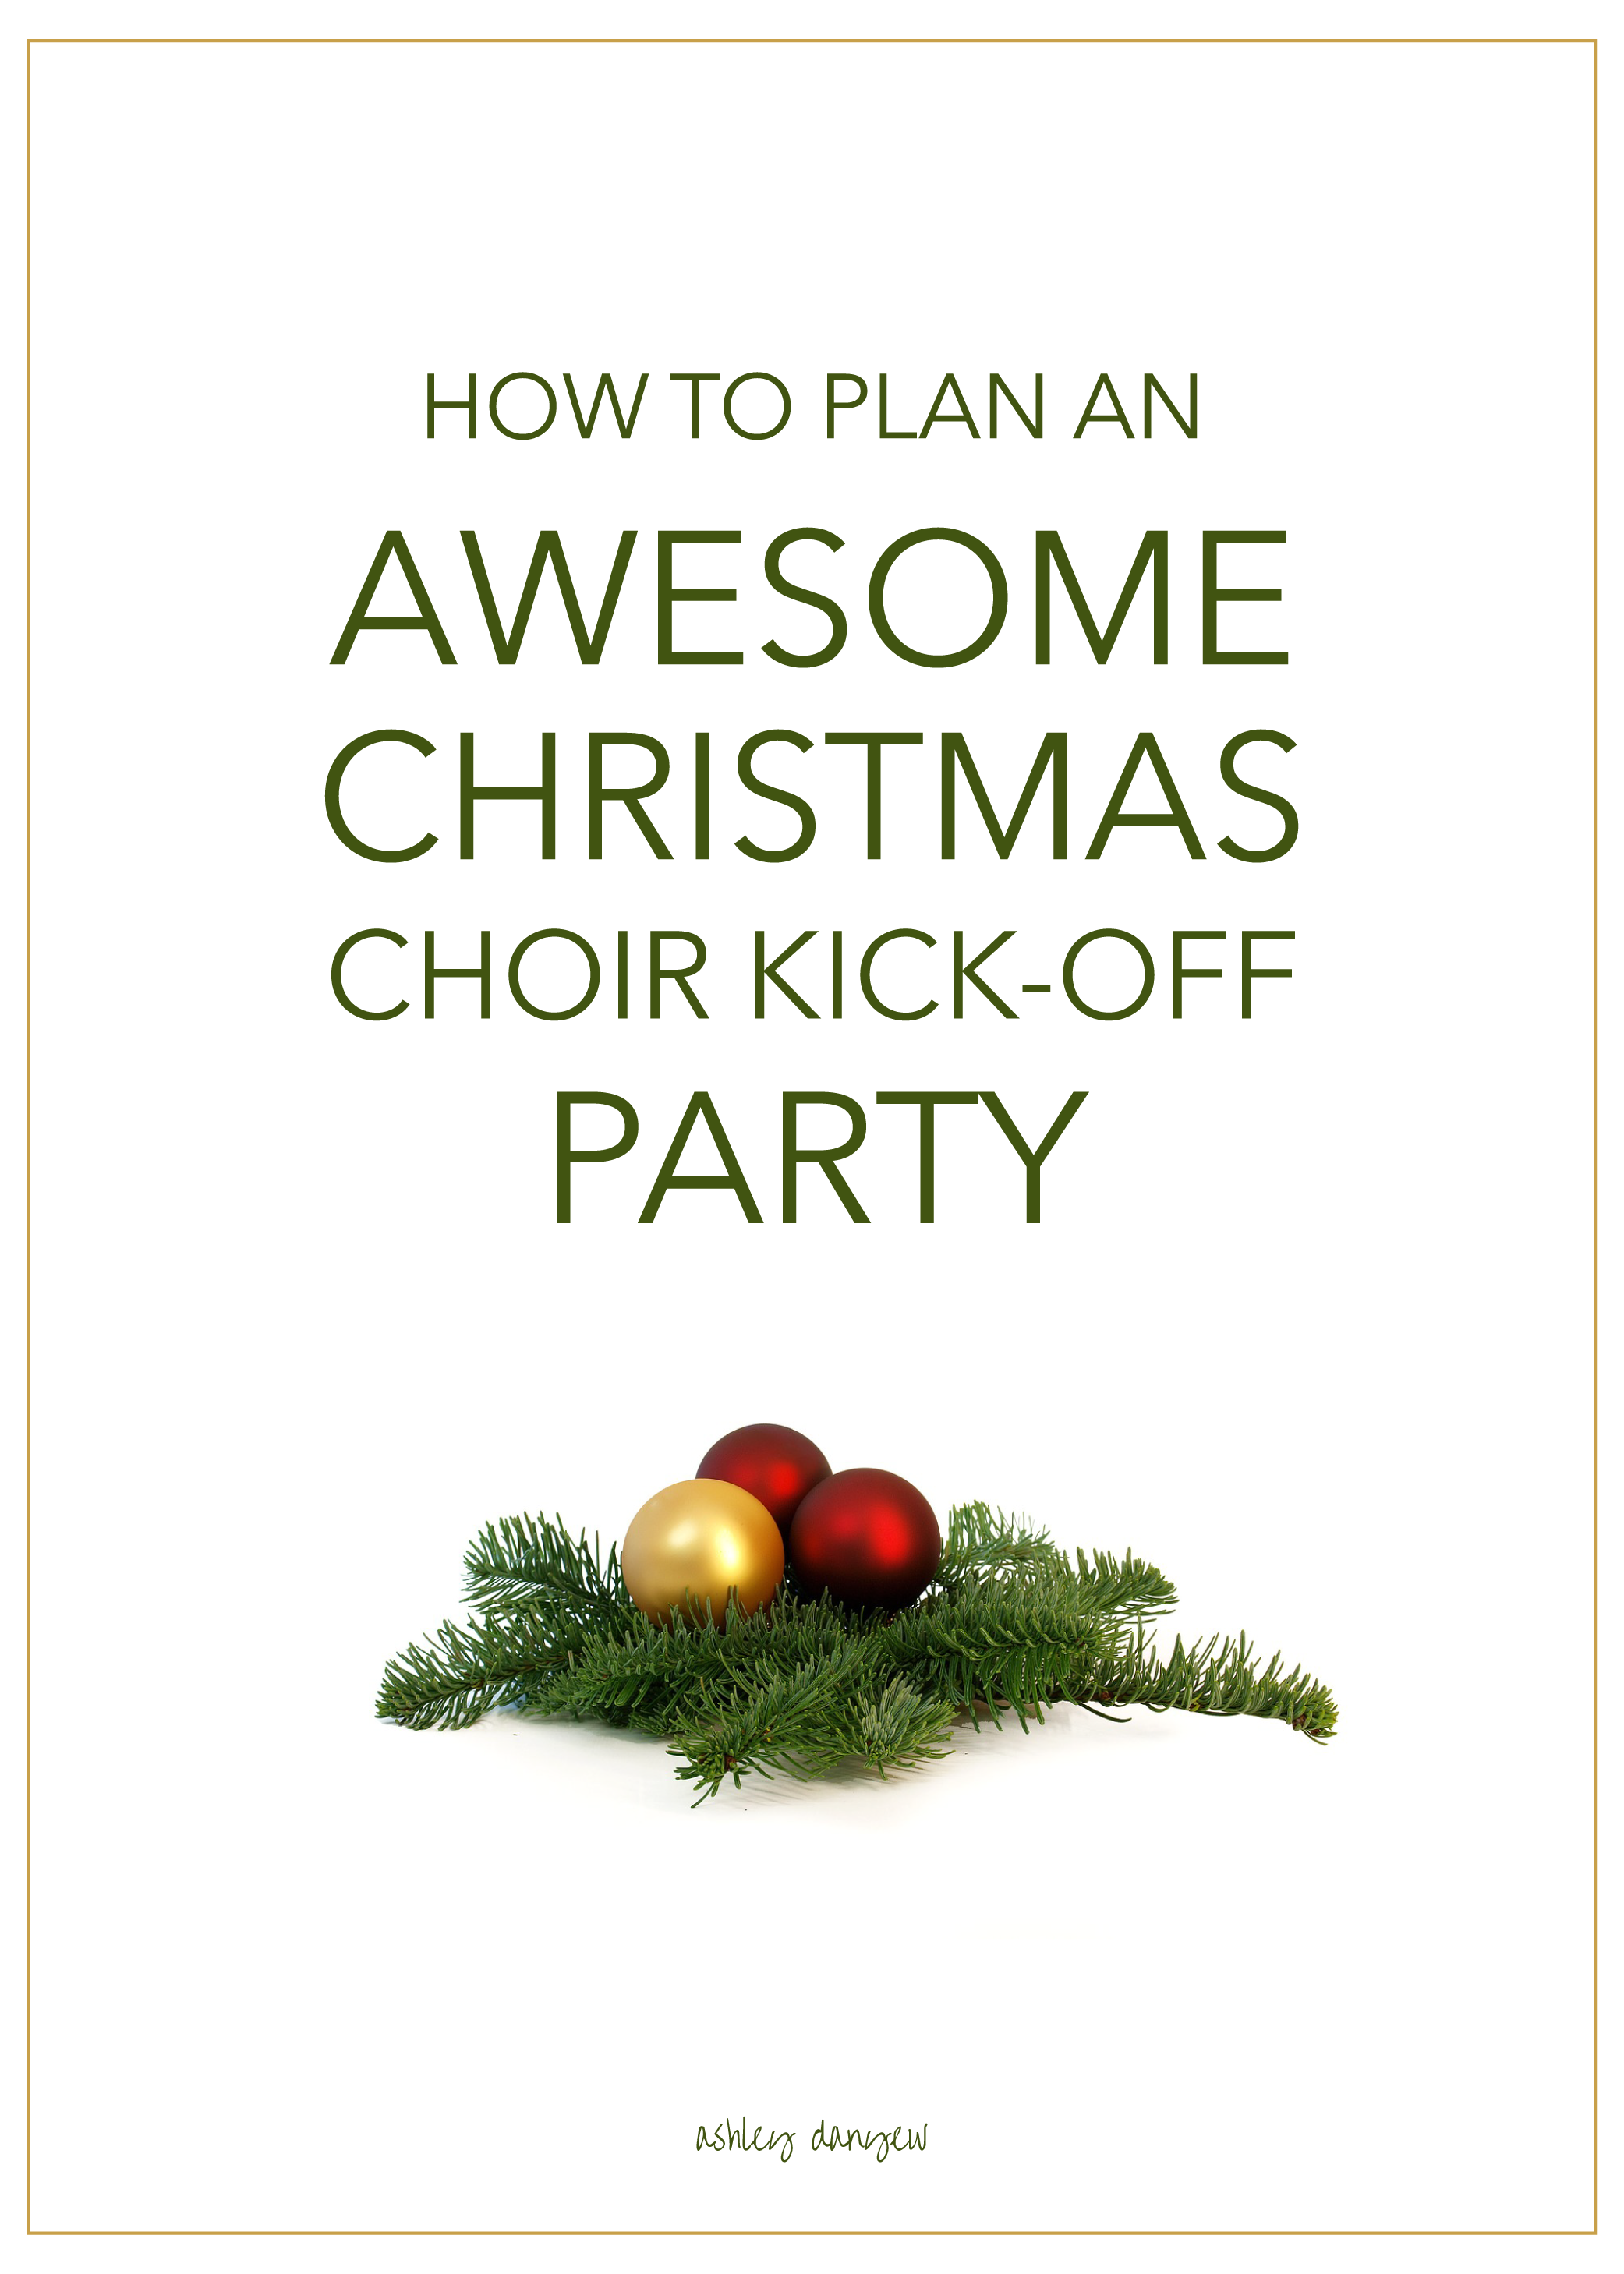 Copy of How to Plan an Awesome Christmas Choir Kick-Off Party